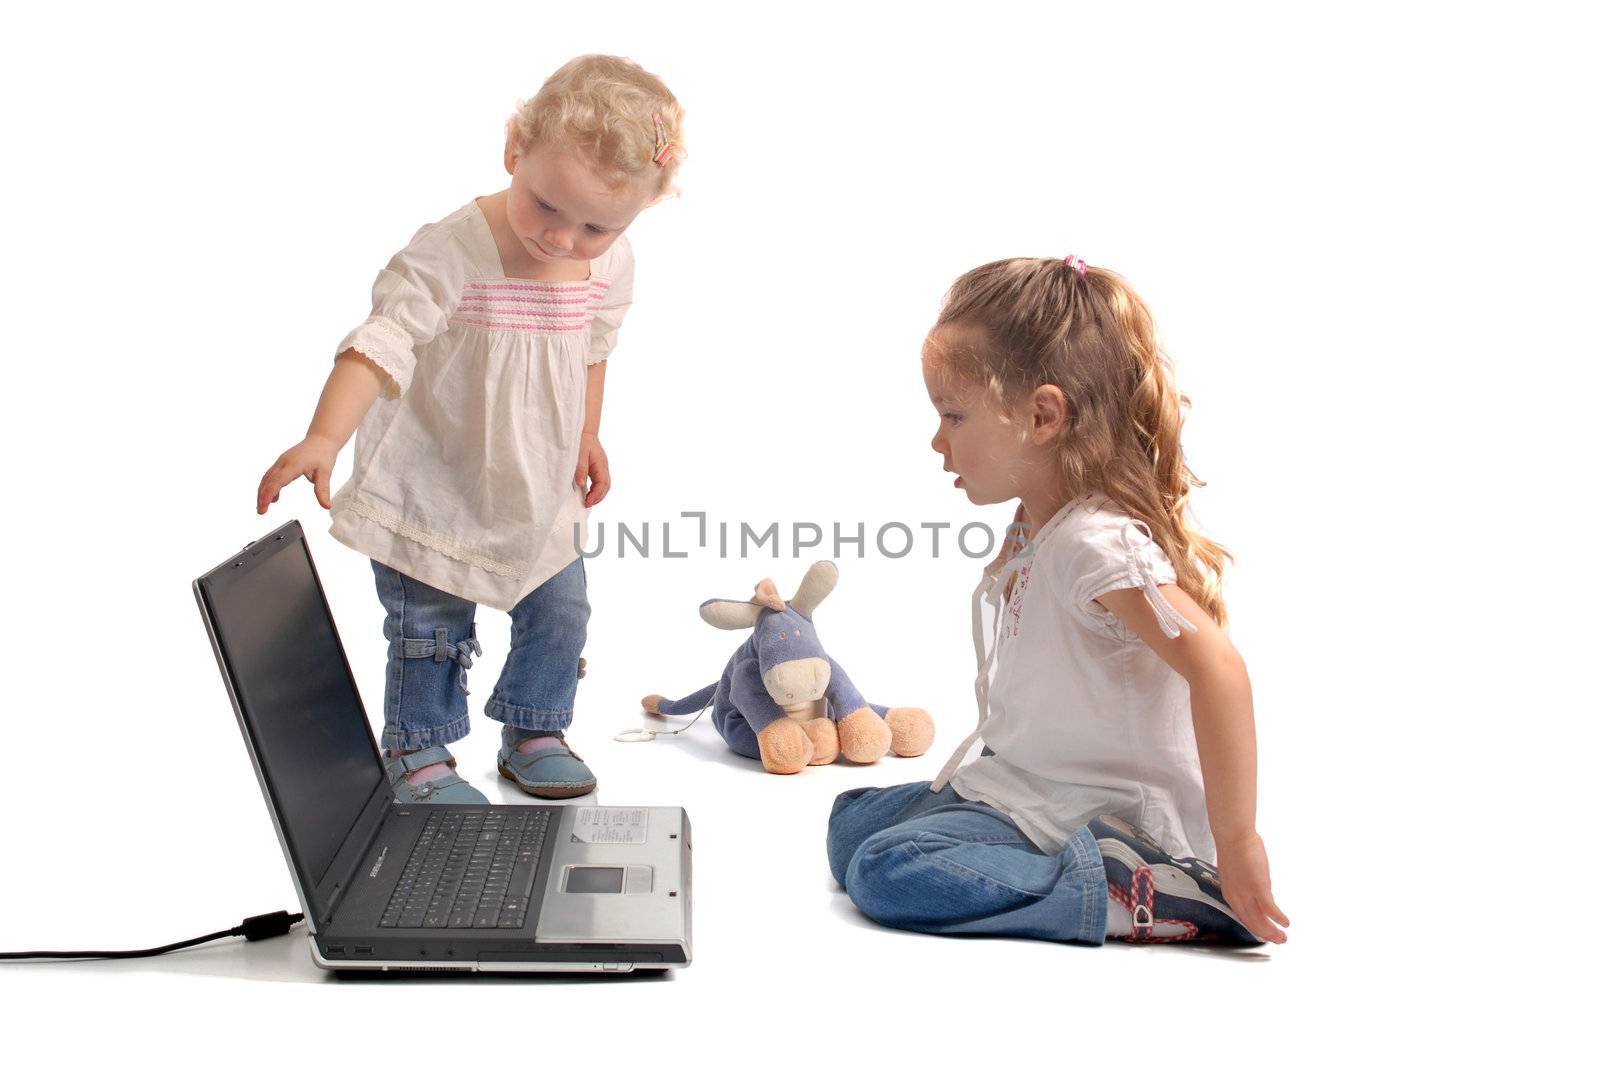 Little girl and her baby sister, bored of playing with toys, waiting for the notebook turns on